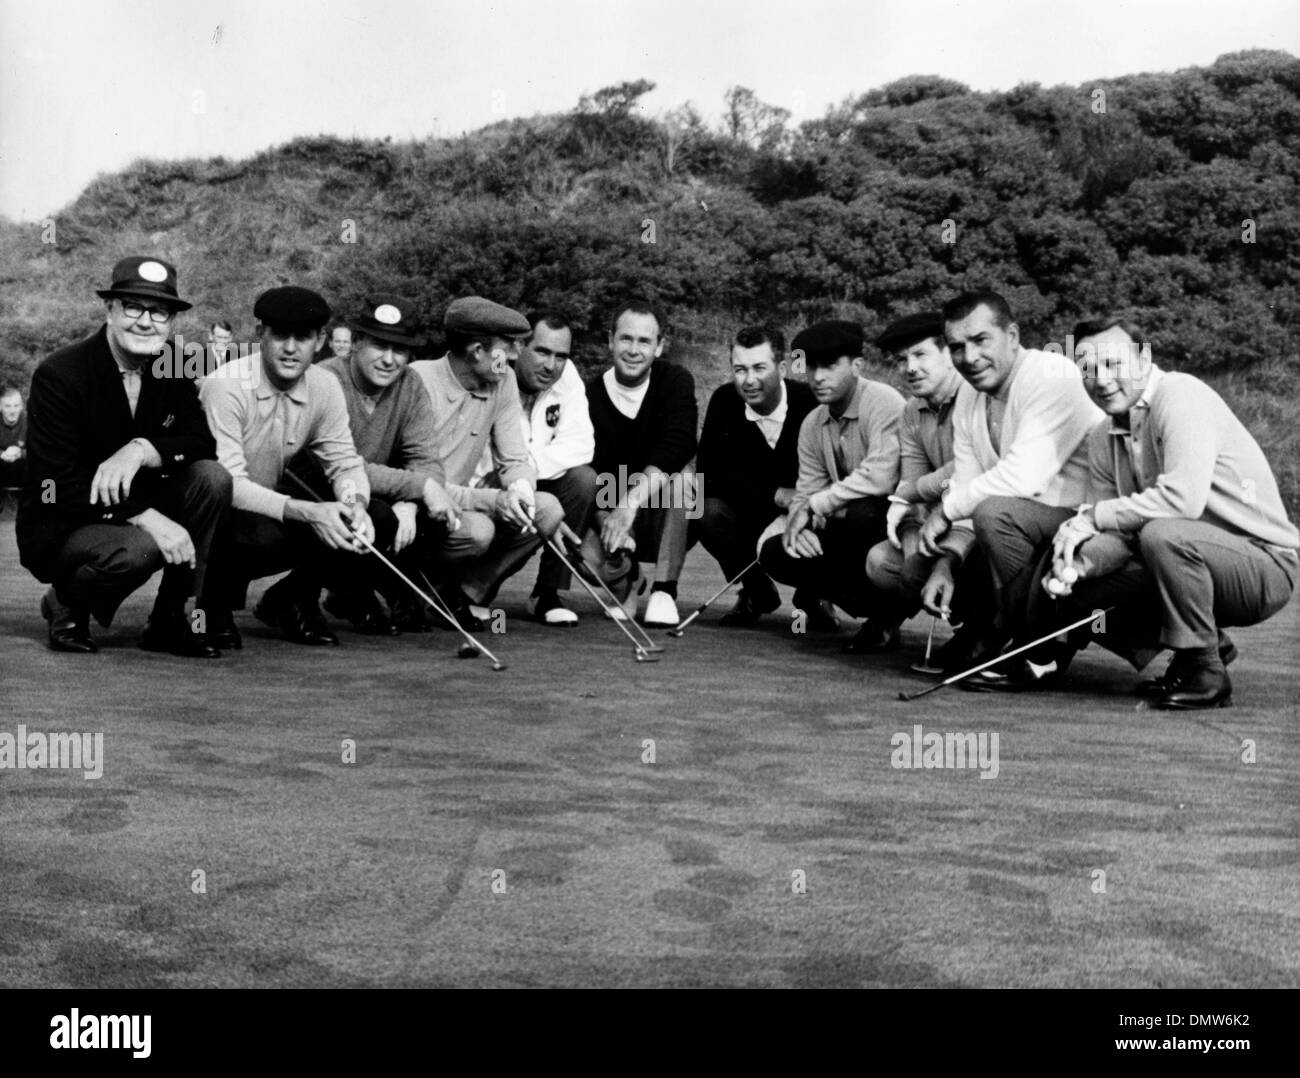 Oct. 6, 1965 - London, England, U.K. - Golfers who will compete in the British Open's Ryder Cup from American team, (L-R) BYRON NELSON, TOMMY JACOBS, BILLY CASPER, DON JANUARY, JOHNNY POTT, TONY LEMA, KEN VENTURI, DAVE MARR, GENE LITTLER, JULIUS BOROS and ARNOLD PALMER.  (Credit Image: © KEYSTONE Pictures USA/ZUMAPRESS.com) Stock Photo